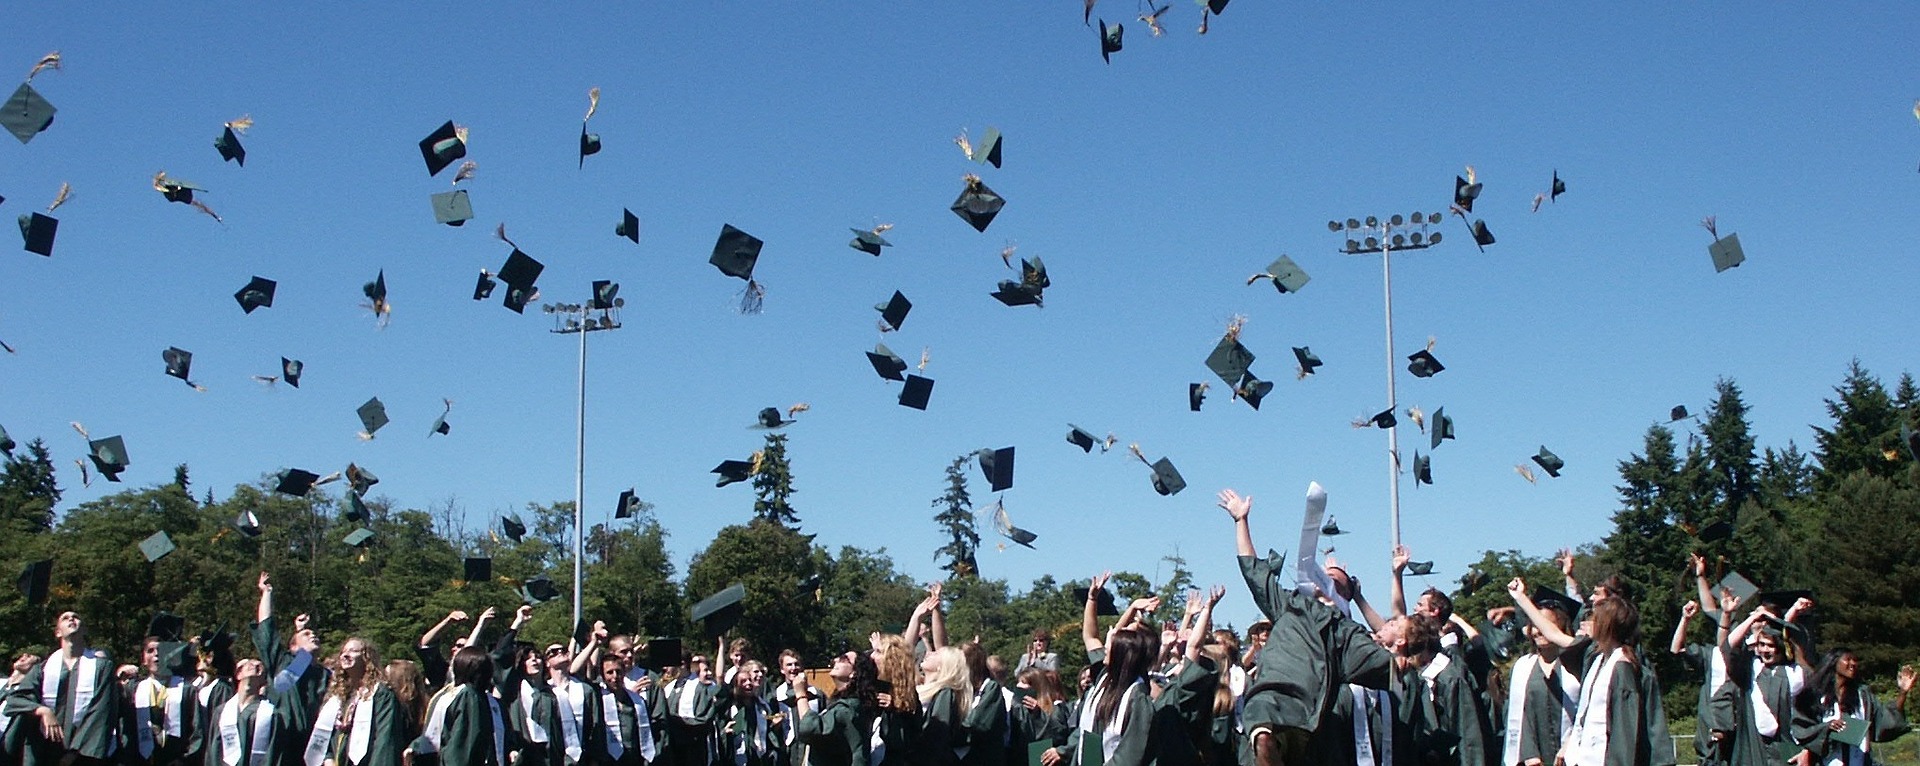 Mortarboards in the air